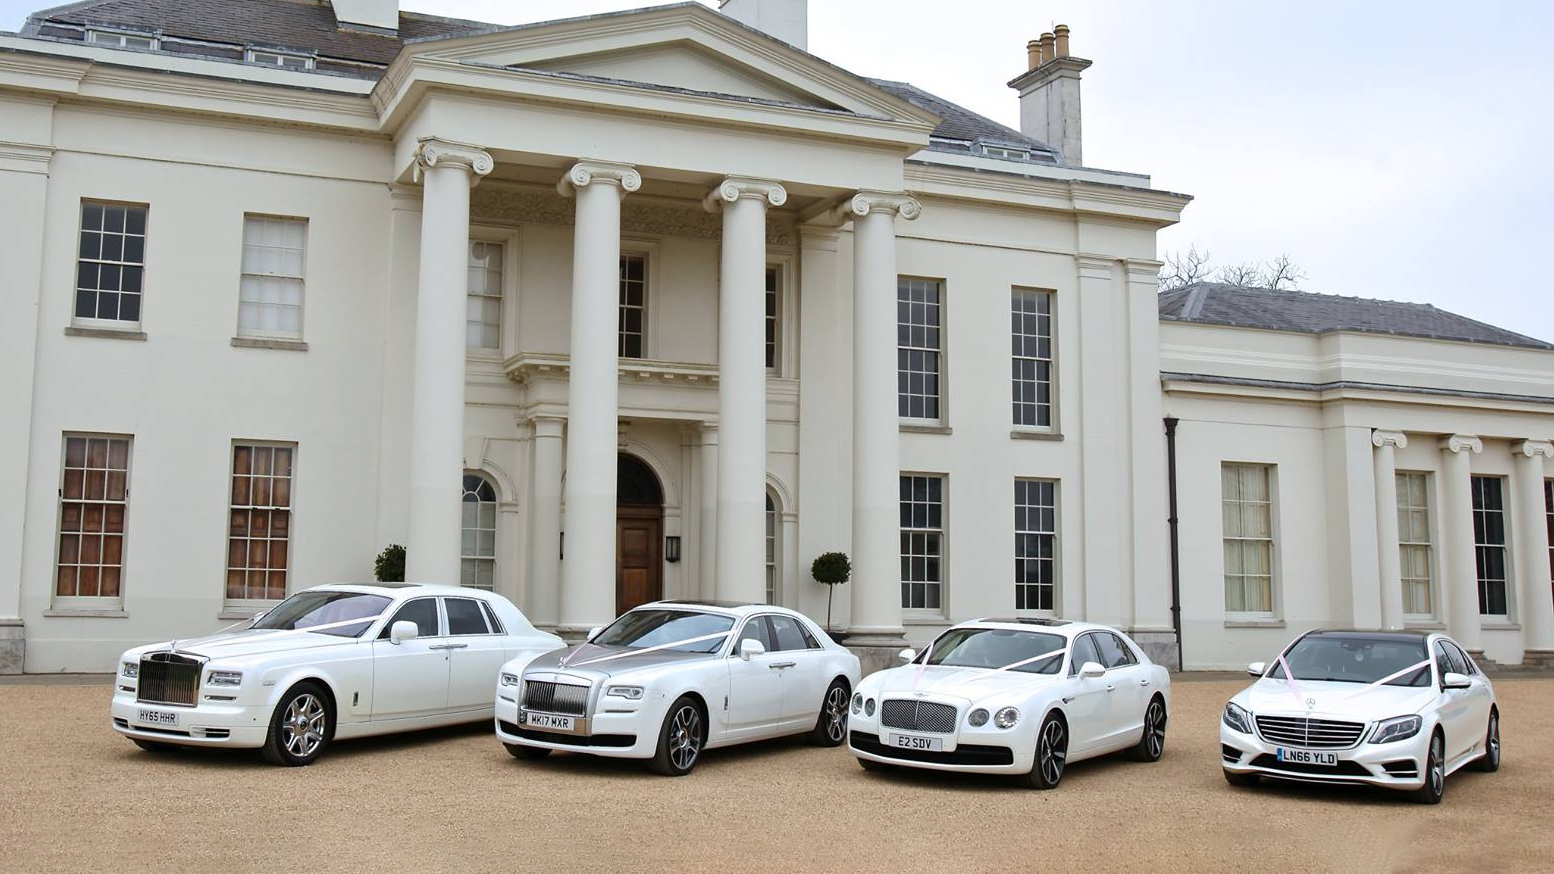 A selection of white Luxurious and modern vehicles all decorated with matching white ribbons on wedding duties in Barton-le-Clay. Frot Left to right: Rolls-Royce Phantom, Rolls-Roy